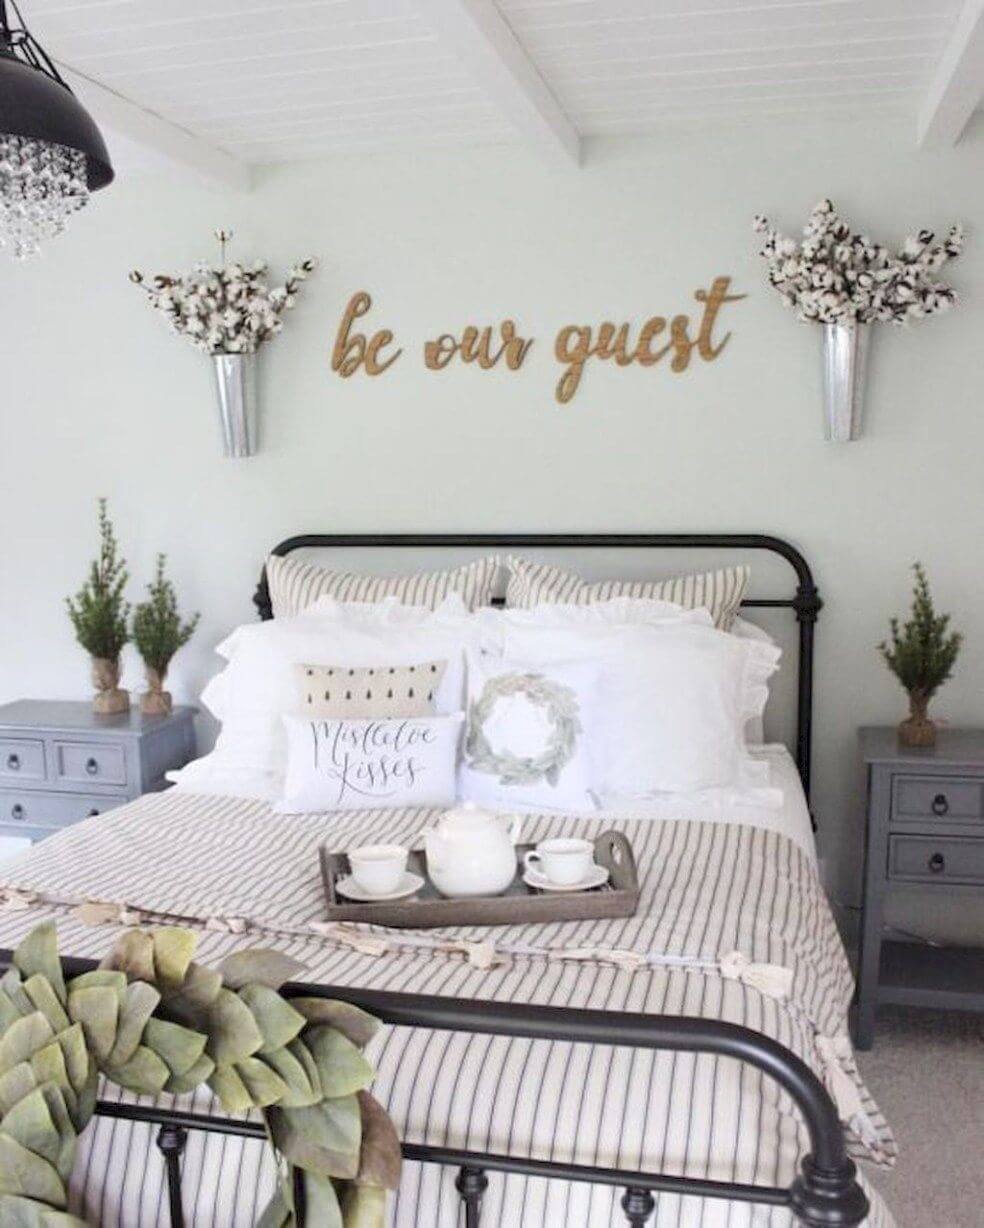 Sweet bedroom in shabby chic